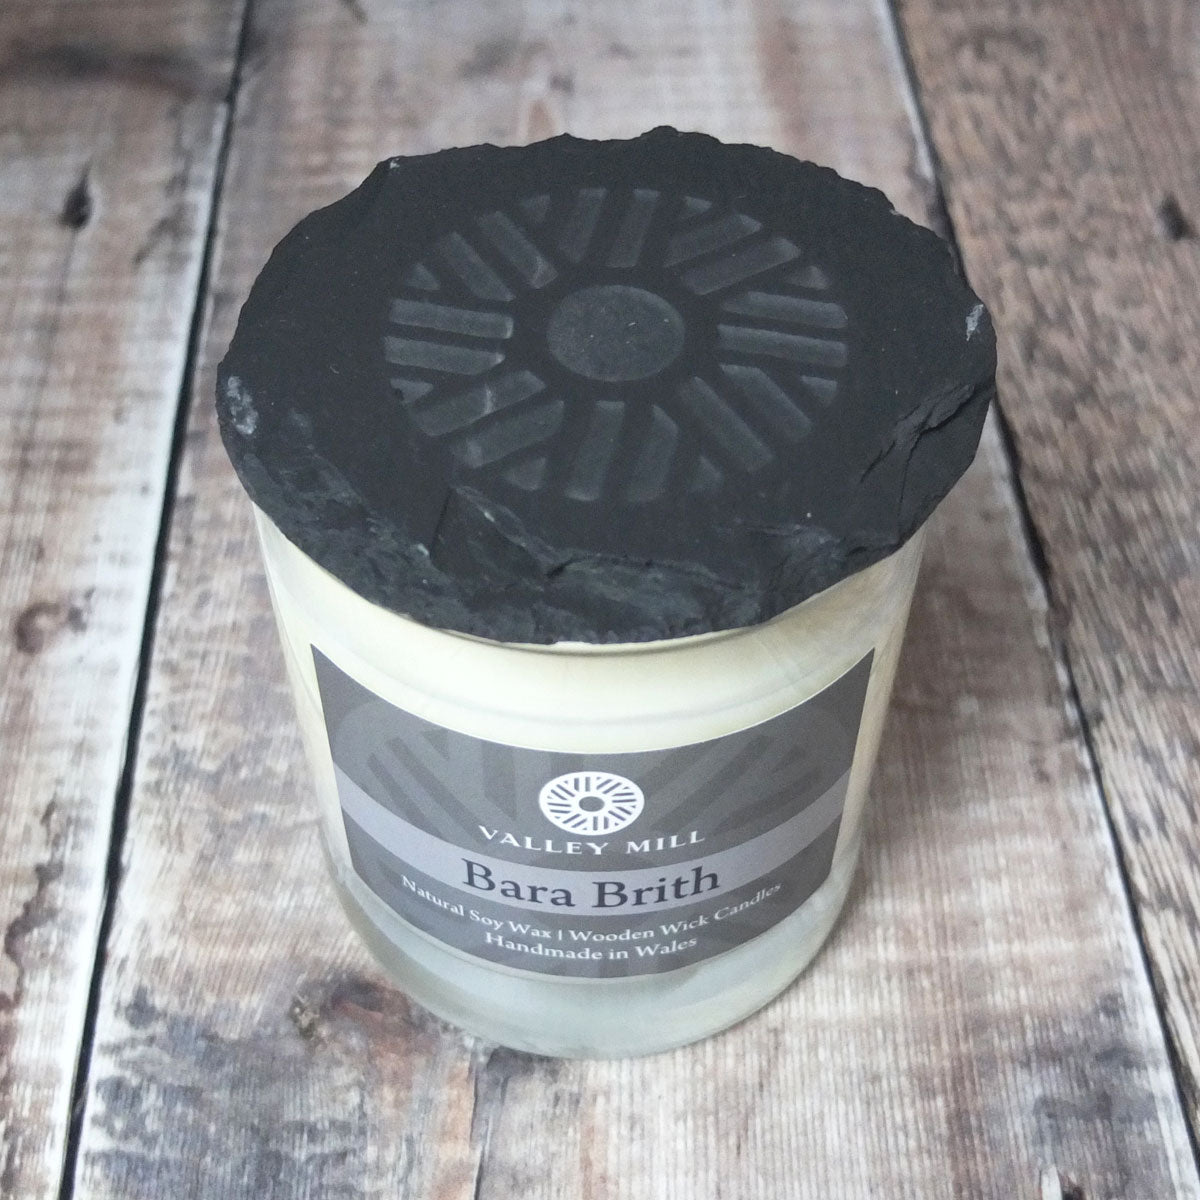 Valley Mill Bara Brith Boxed Candle